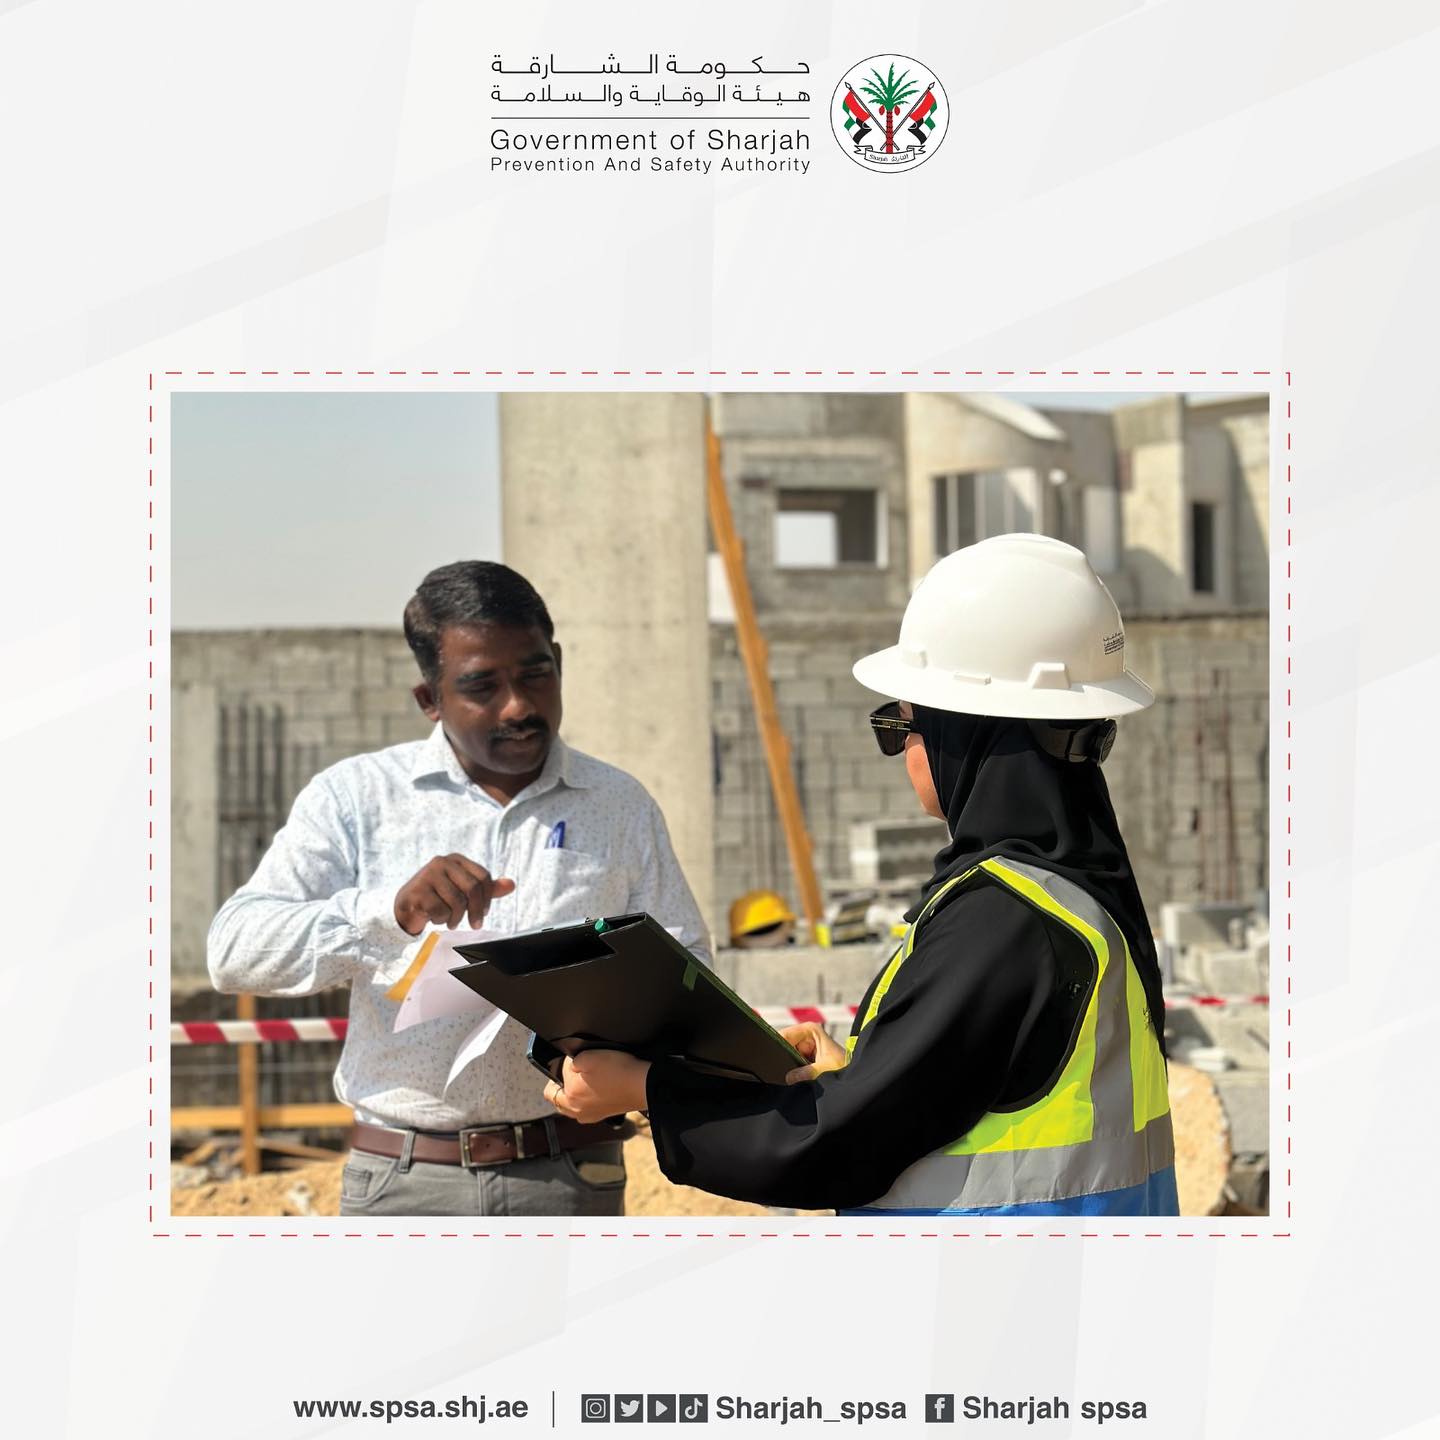 A visit to the construction sites to introduce the accident reporting service